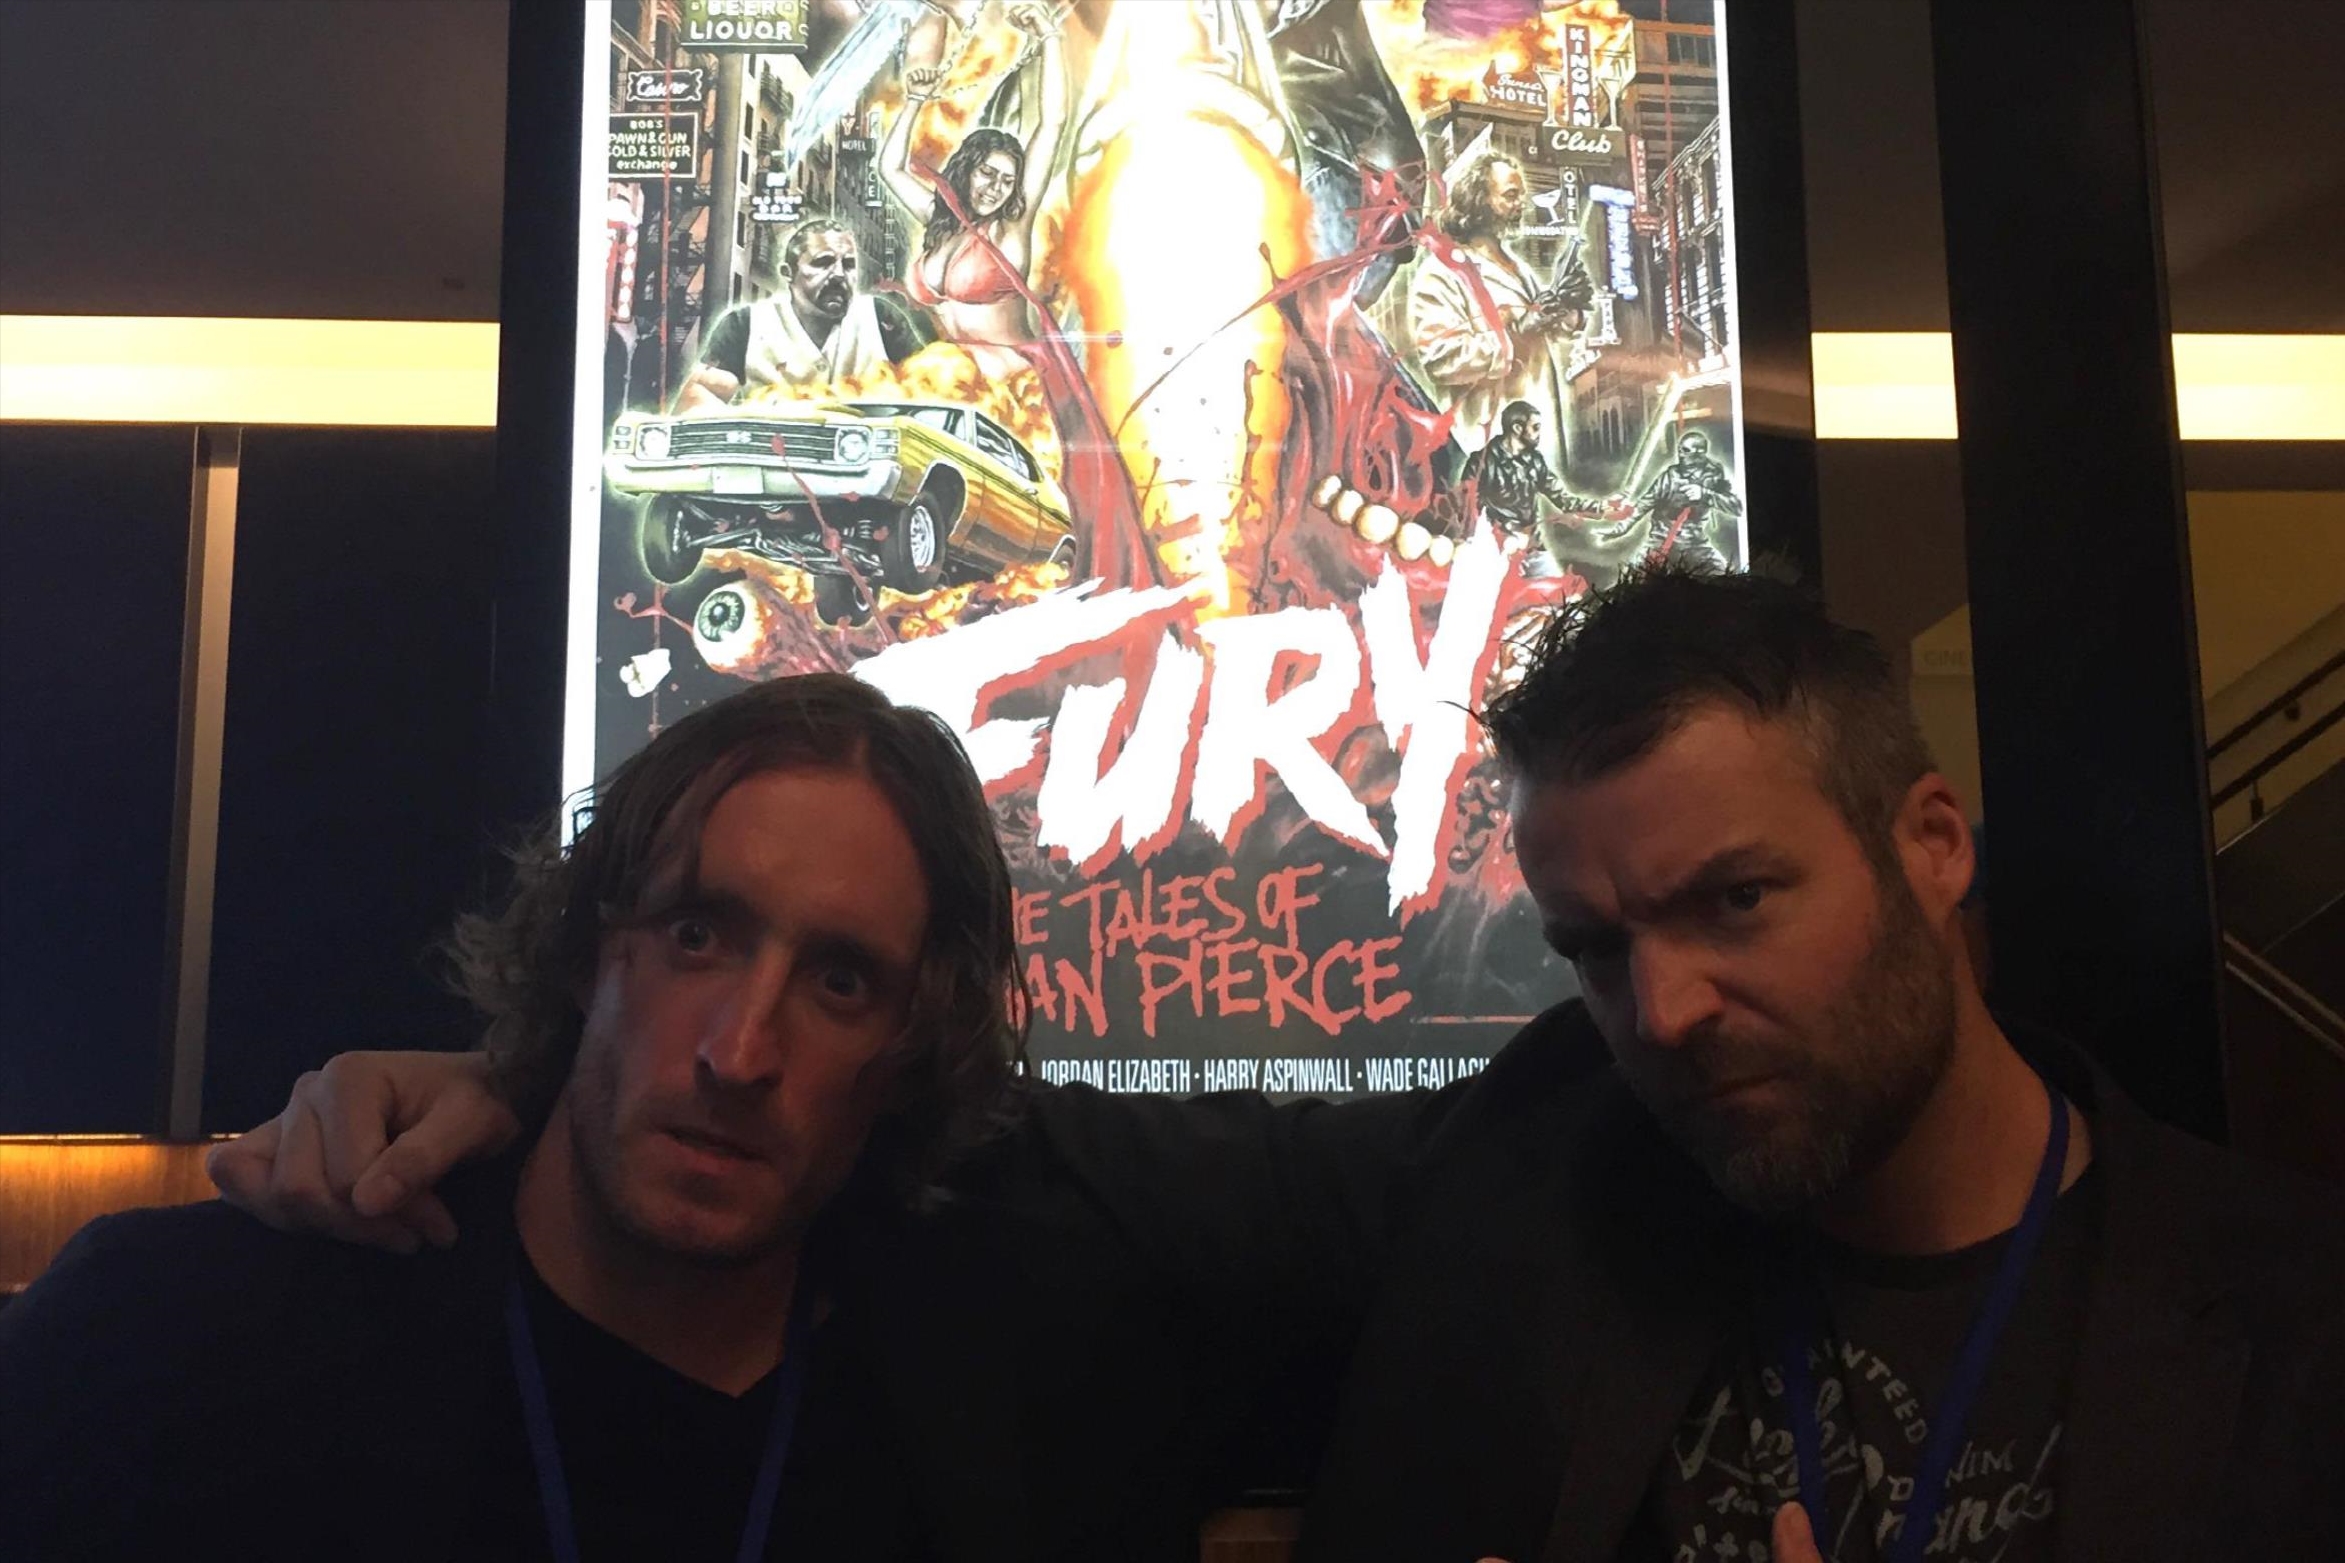 Michael McCarthy and Kevin McCarthy at the world premier of Fury:The Tales of Ronan Pierce at Fantastic Planet 2014